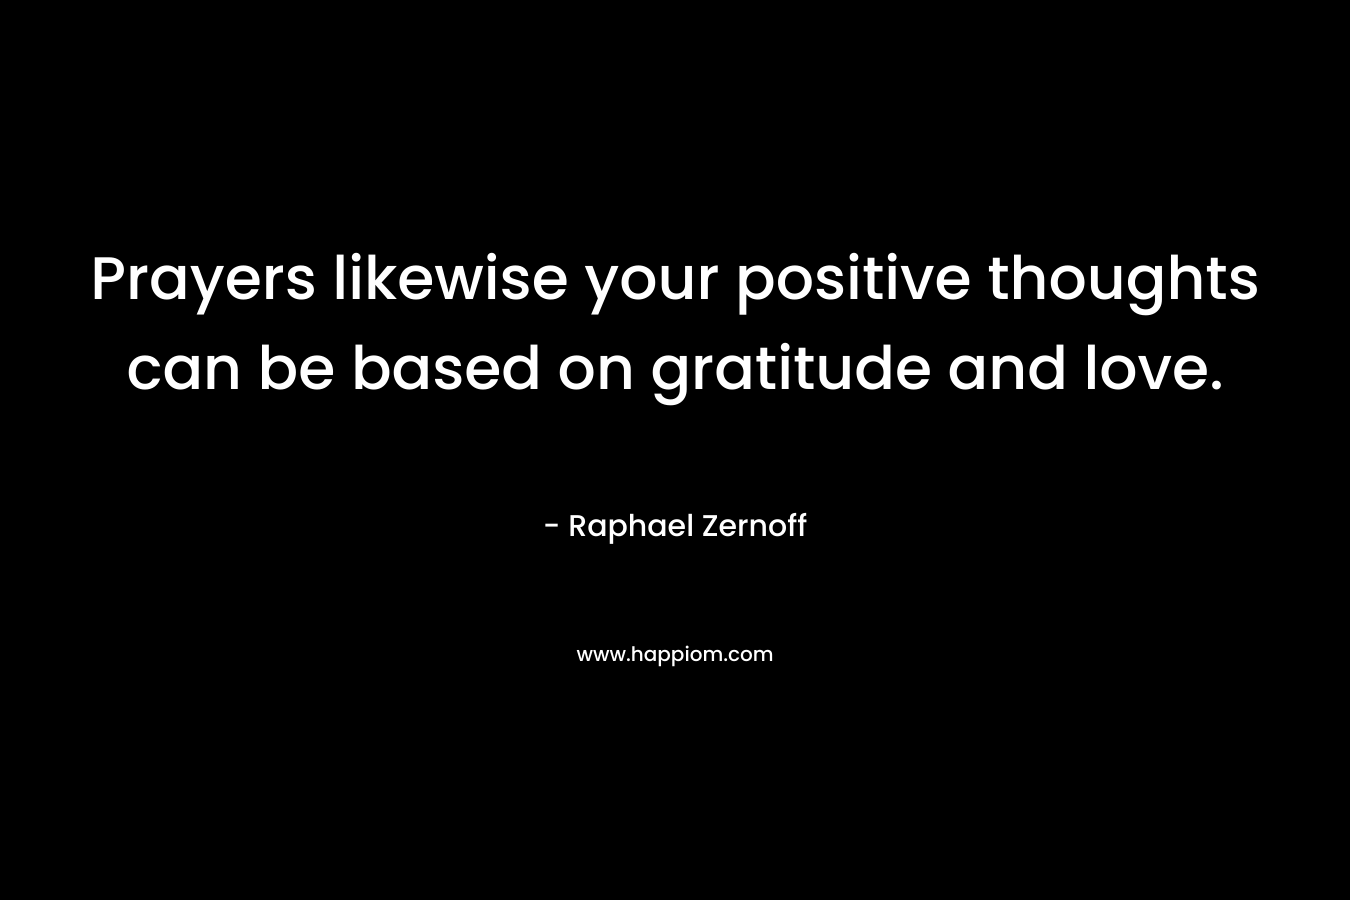 Prayers likewise your positive thoughts can be based on gratitude and love. – Raphael Zernoff